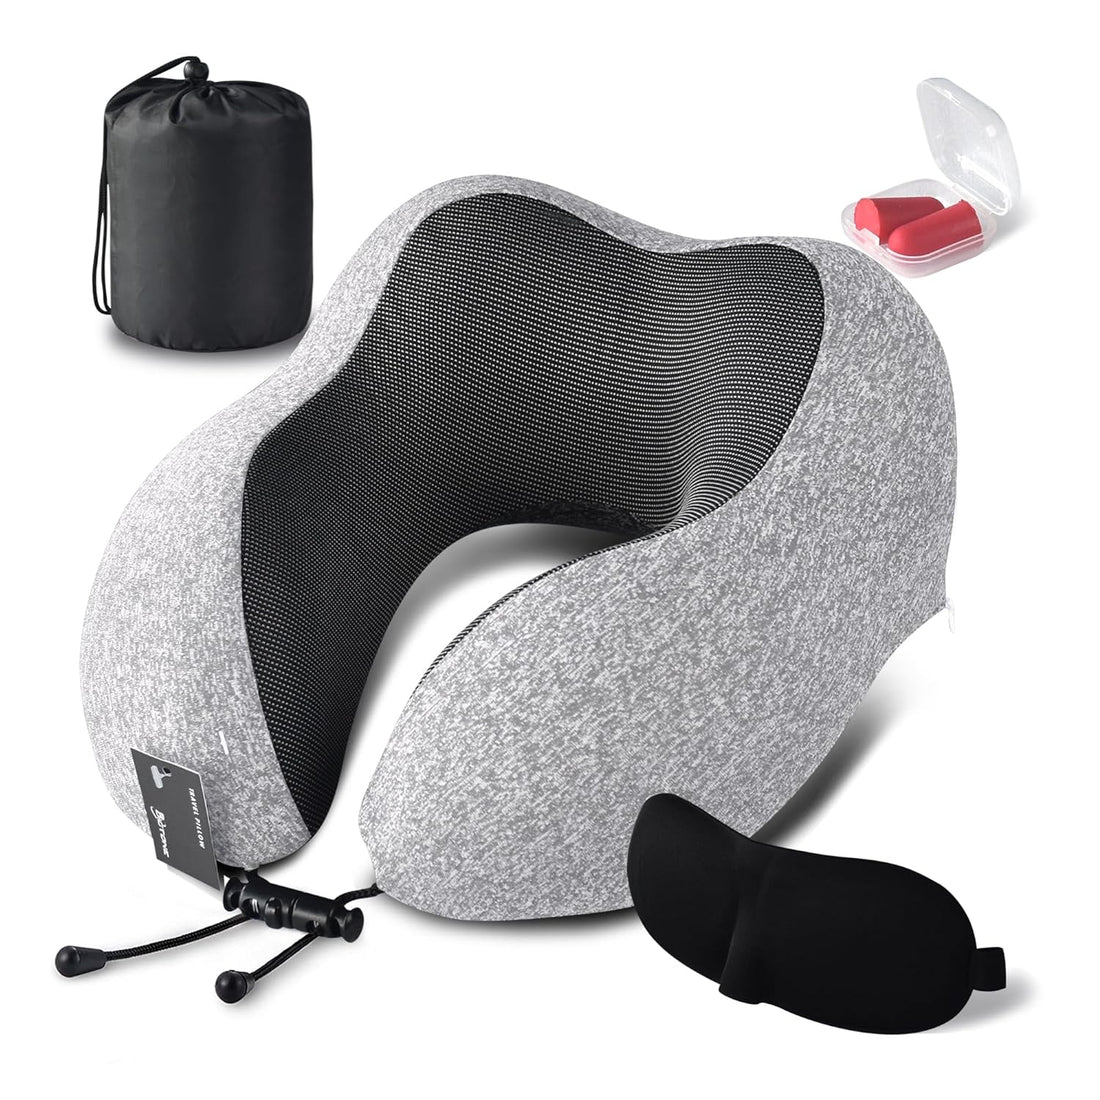 BIGTONE Travel Pillow 100% Pure Memory Foam Neck Pillow, Comfortable & Breathable Cover, Machine Washable, Airplane Travel Kit with 3D Contoured Eye Masks, Earplugs, and Luxury Bag, Standard (Grey)